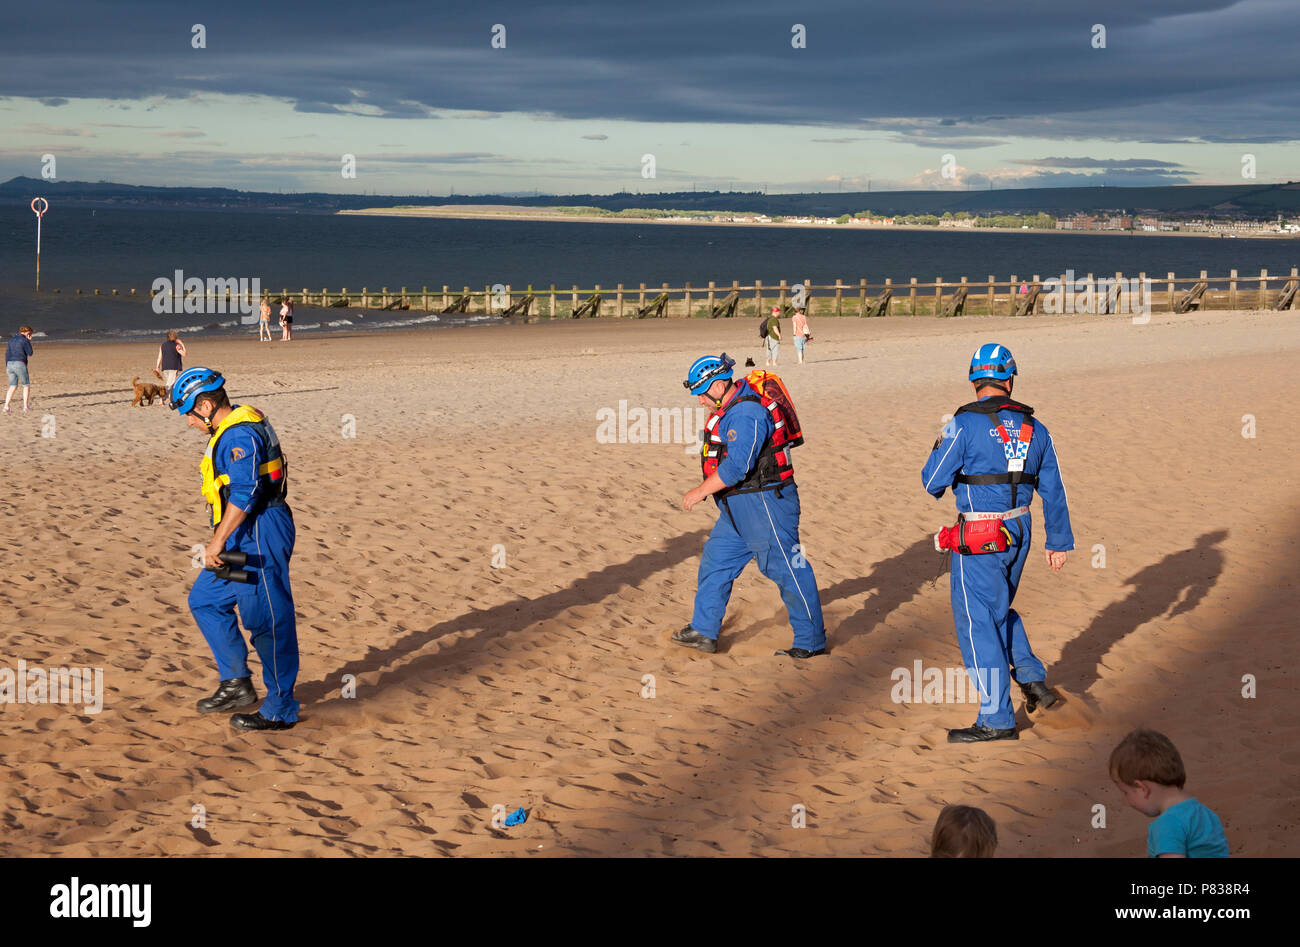 Edinburgh, UK. 08 July 2018. Portobello Beach, Edinburgh, Scotland, UK, between 7pm and 9pm this evening coastguard with four or more vehicles plus one helicopter and a reinforced boat conducting a search of the shoreline of the busy beach, unknown incident Stock Photo